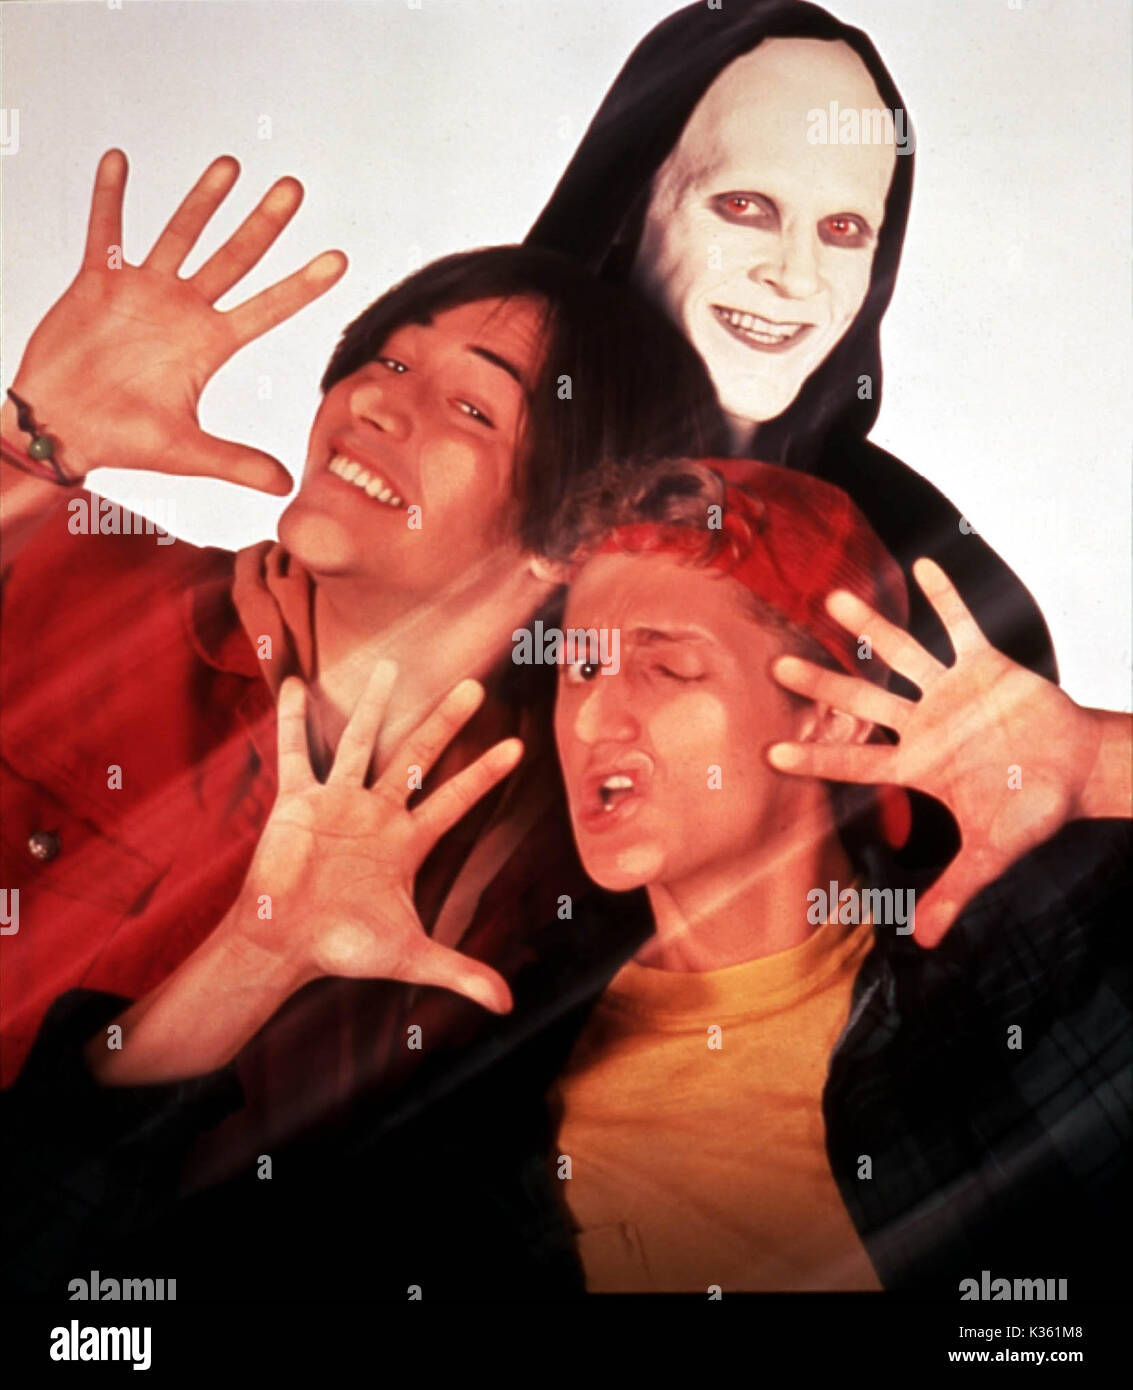 BILL AND TED'S BOGUS JOURNEY   [US 1991]  KEANU REEVES, ALEX WINTER, WILLIAM SADLER as The Grim Reaper     Date: 1991 Stock Photo